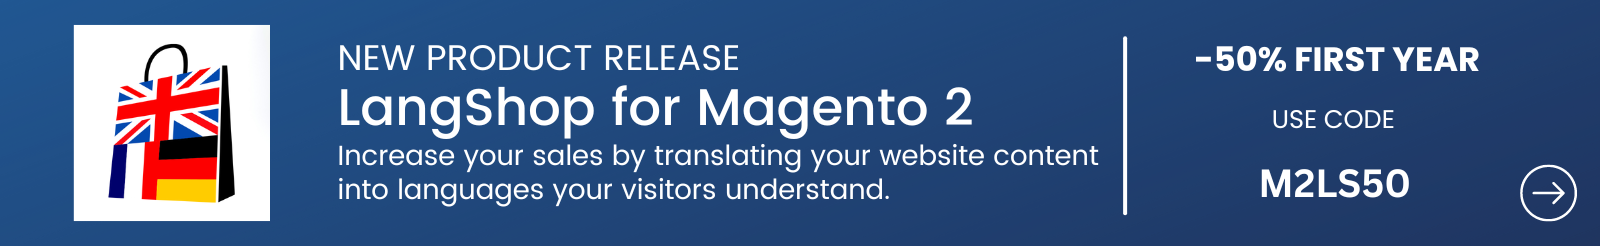 New Product Release LangShop for Magento 2 Increase your sales by translating your website content into languages your visitors understand. -50% FIRST YEAR coupon code M2LS50 